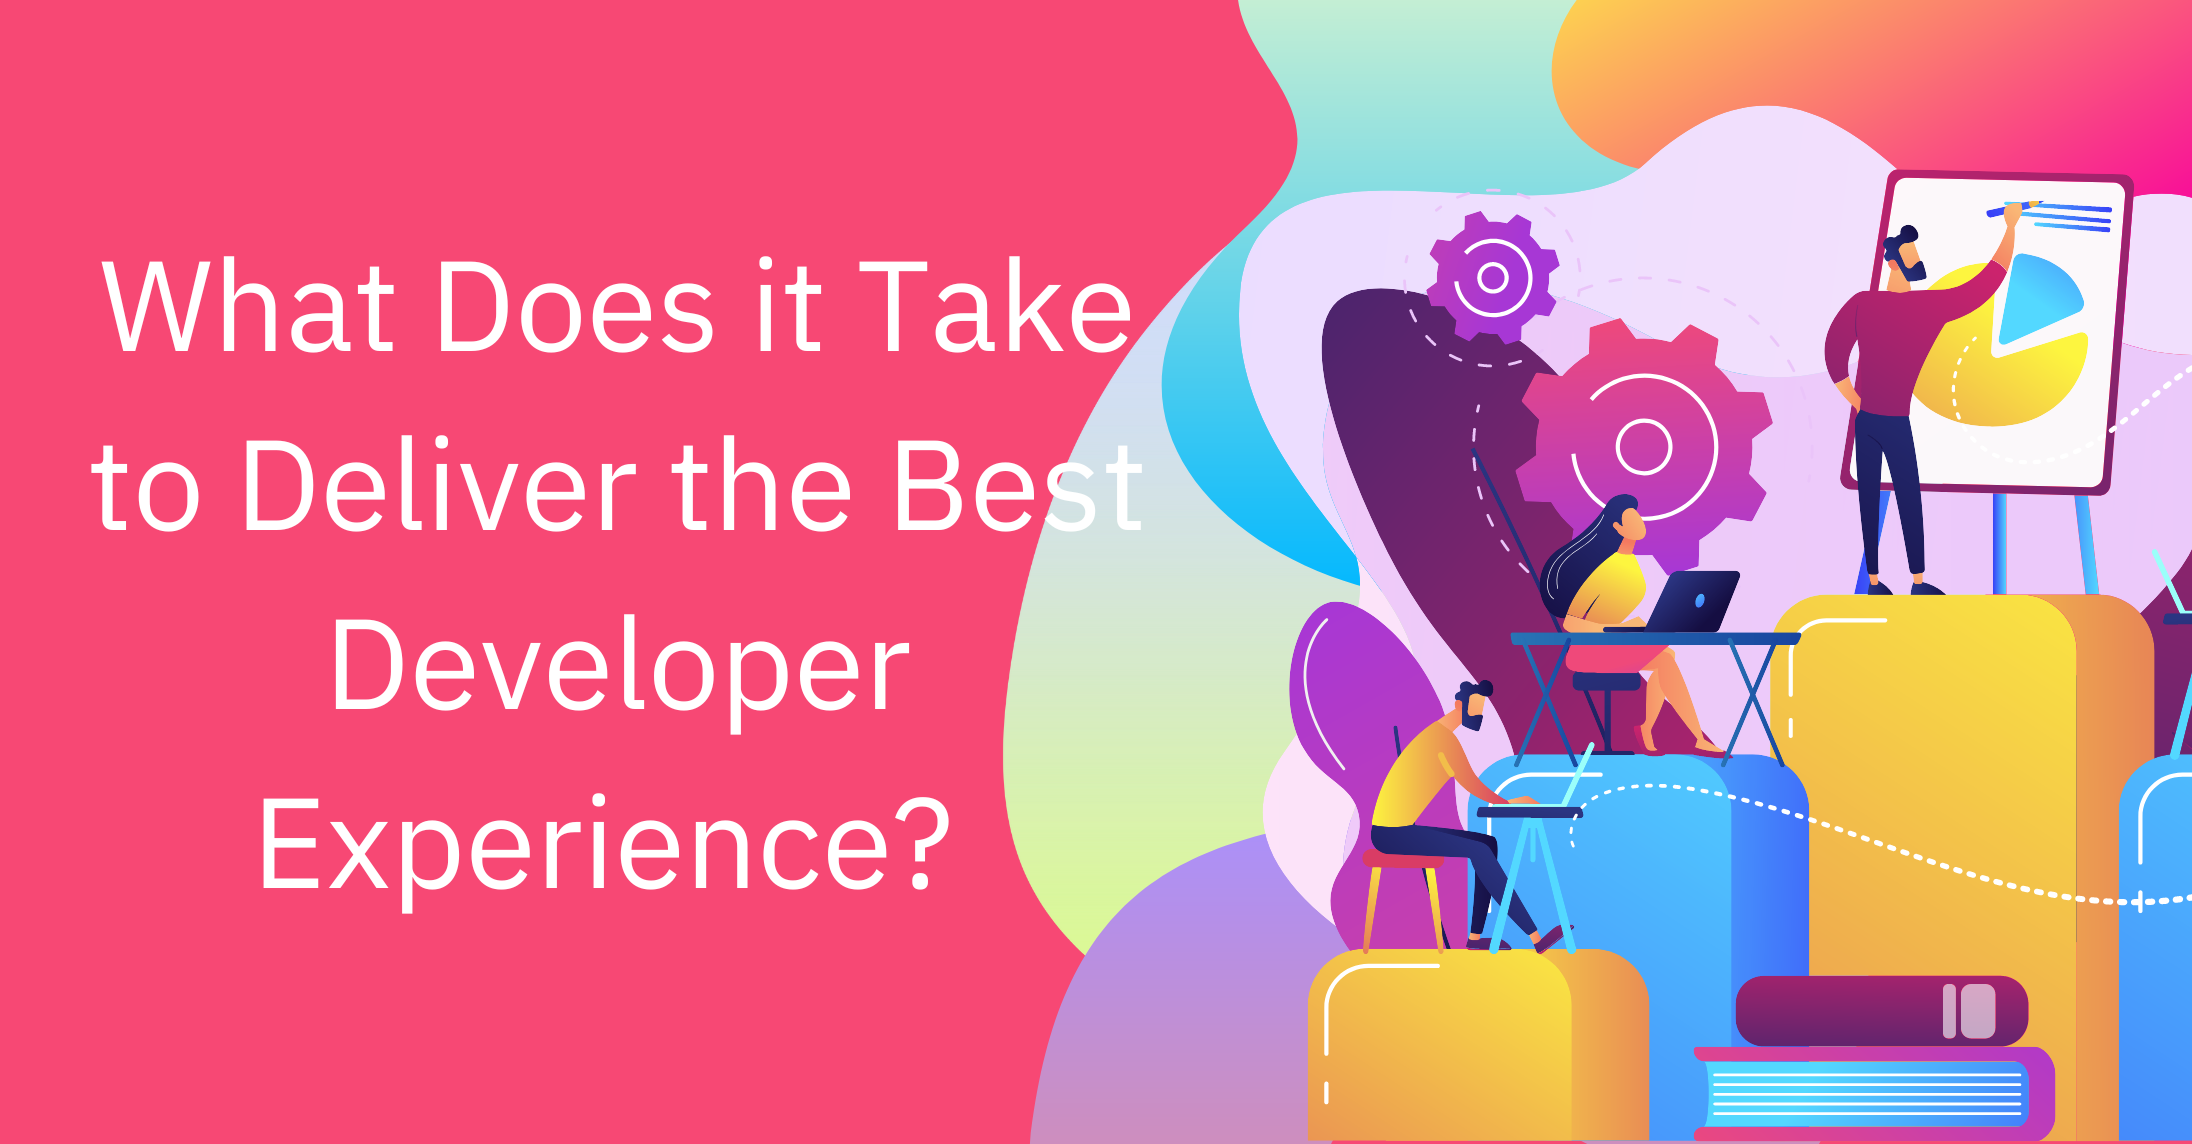 What Does it Take to Deliver the Best Developer Experience? 